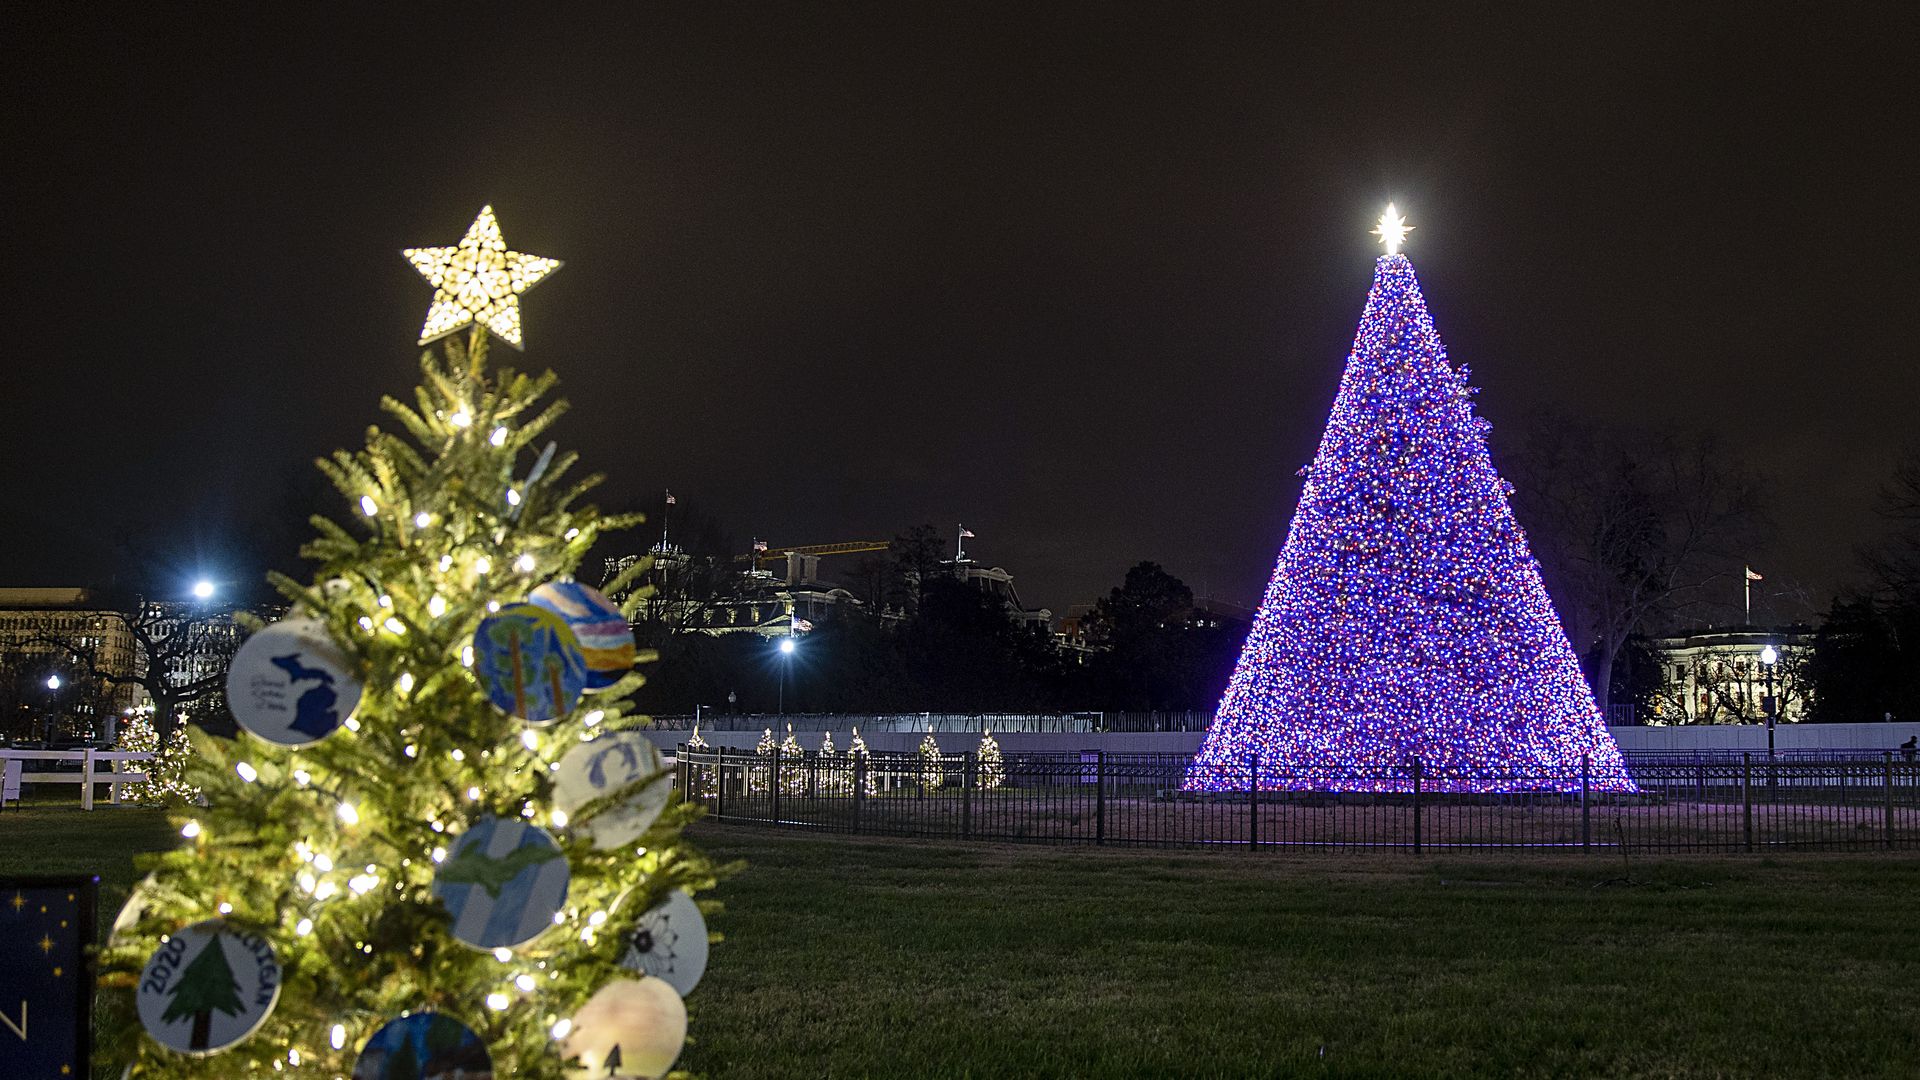 The National Christmas tree stands illuminated with the White House in the background.